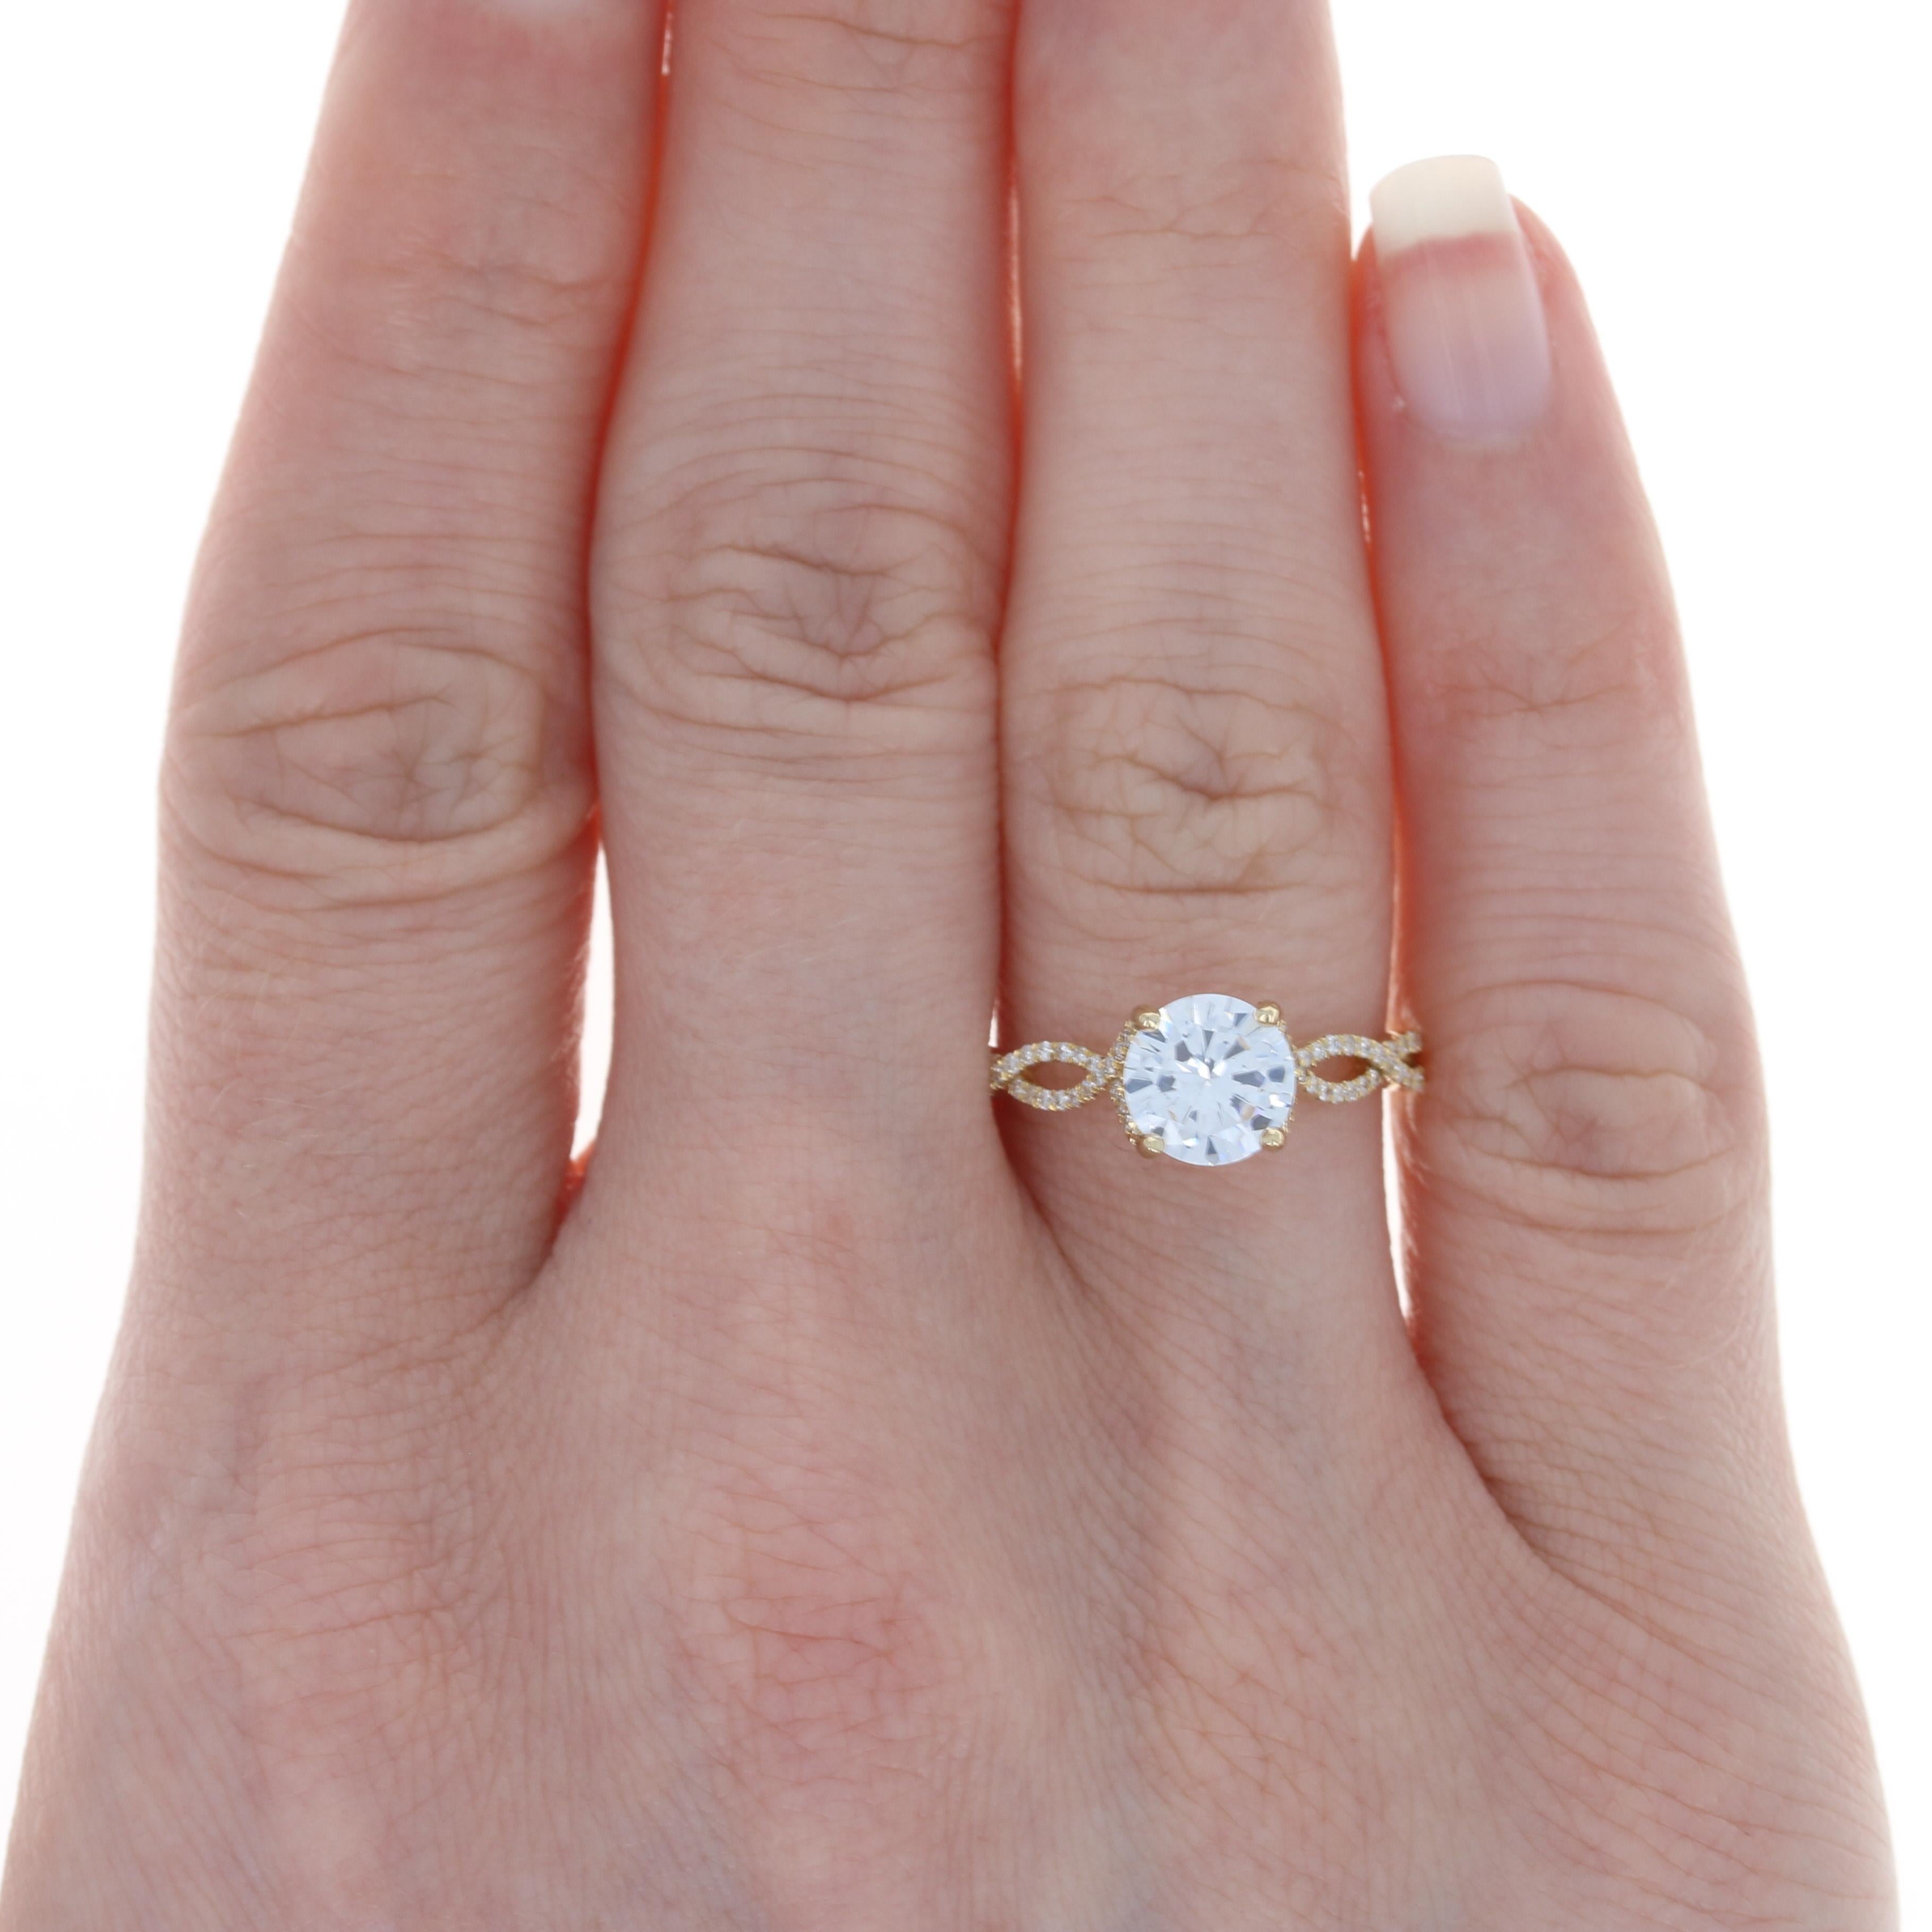 Size: 6 
Sizing Fee: Up 2 sizes for $80 or Down 1 size for $60 

Metal Content: 14k Yellow Gold  

Stone Information: 
Cubic Zirconia (placeholder solitaire) 
Diameter: 6.9mm 

Natural Diamond Accents
Total Carats: .39ctw
Cut: Round Brilliant